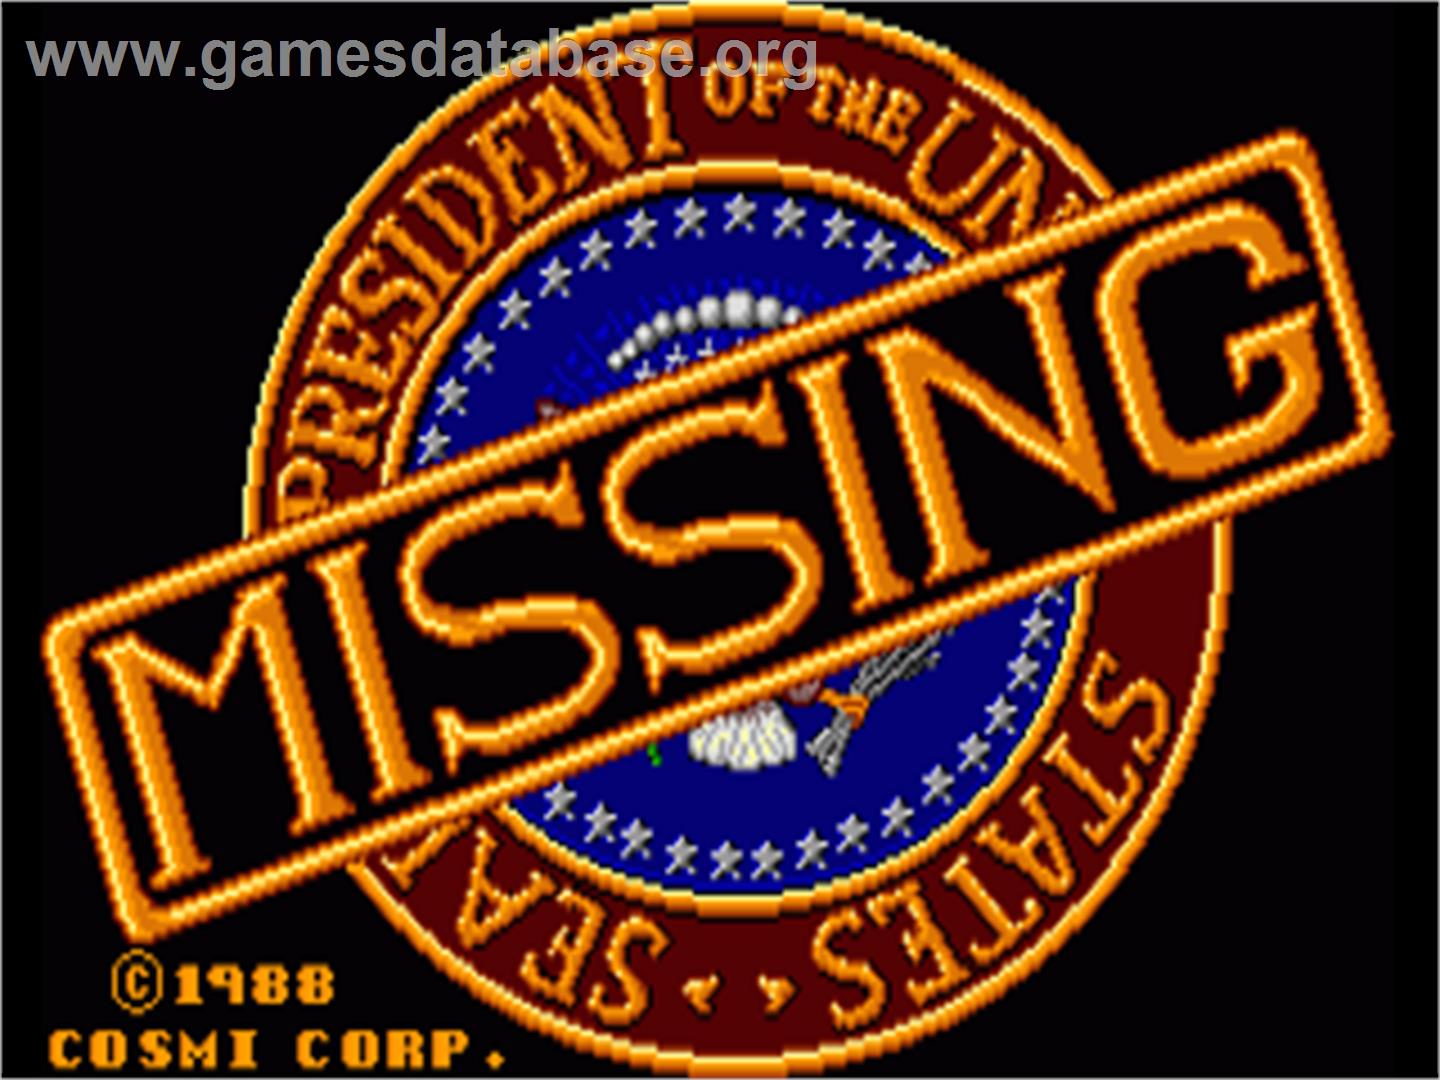 President is Missing - Commodore Amiga - Artwork - Title Screen